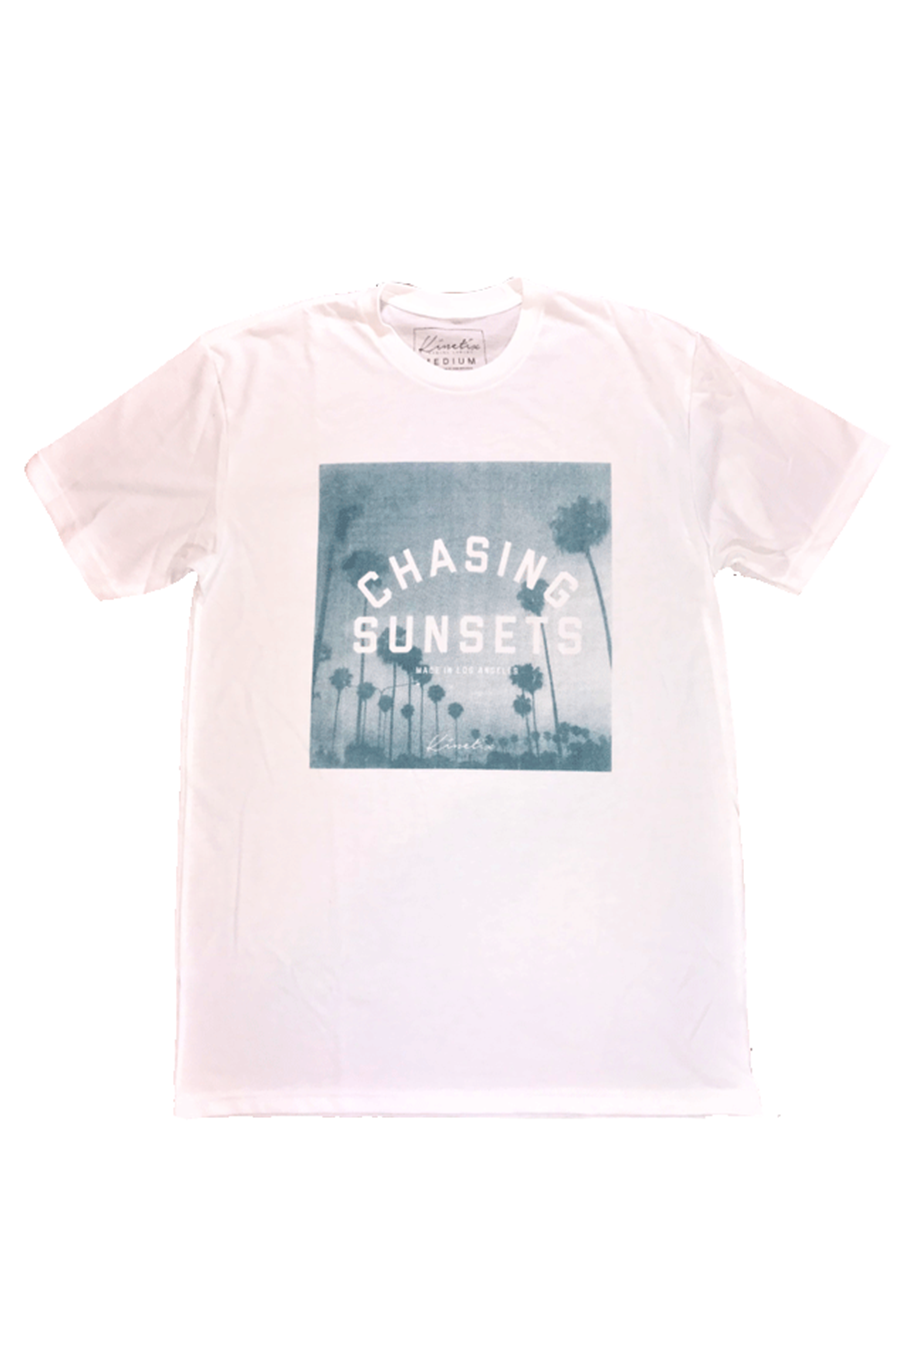 Chasing Sunsets Tee | White - Main Image Number 1 of 2